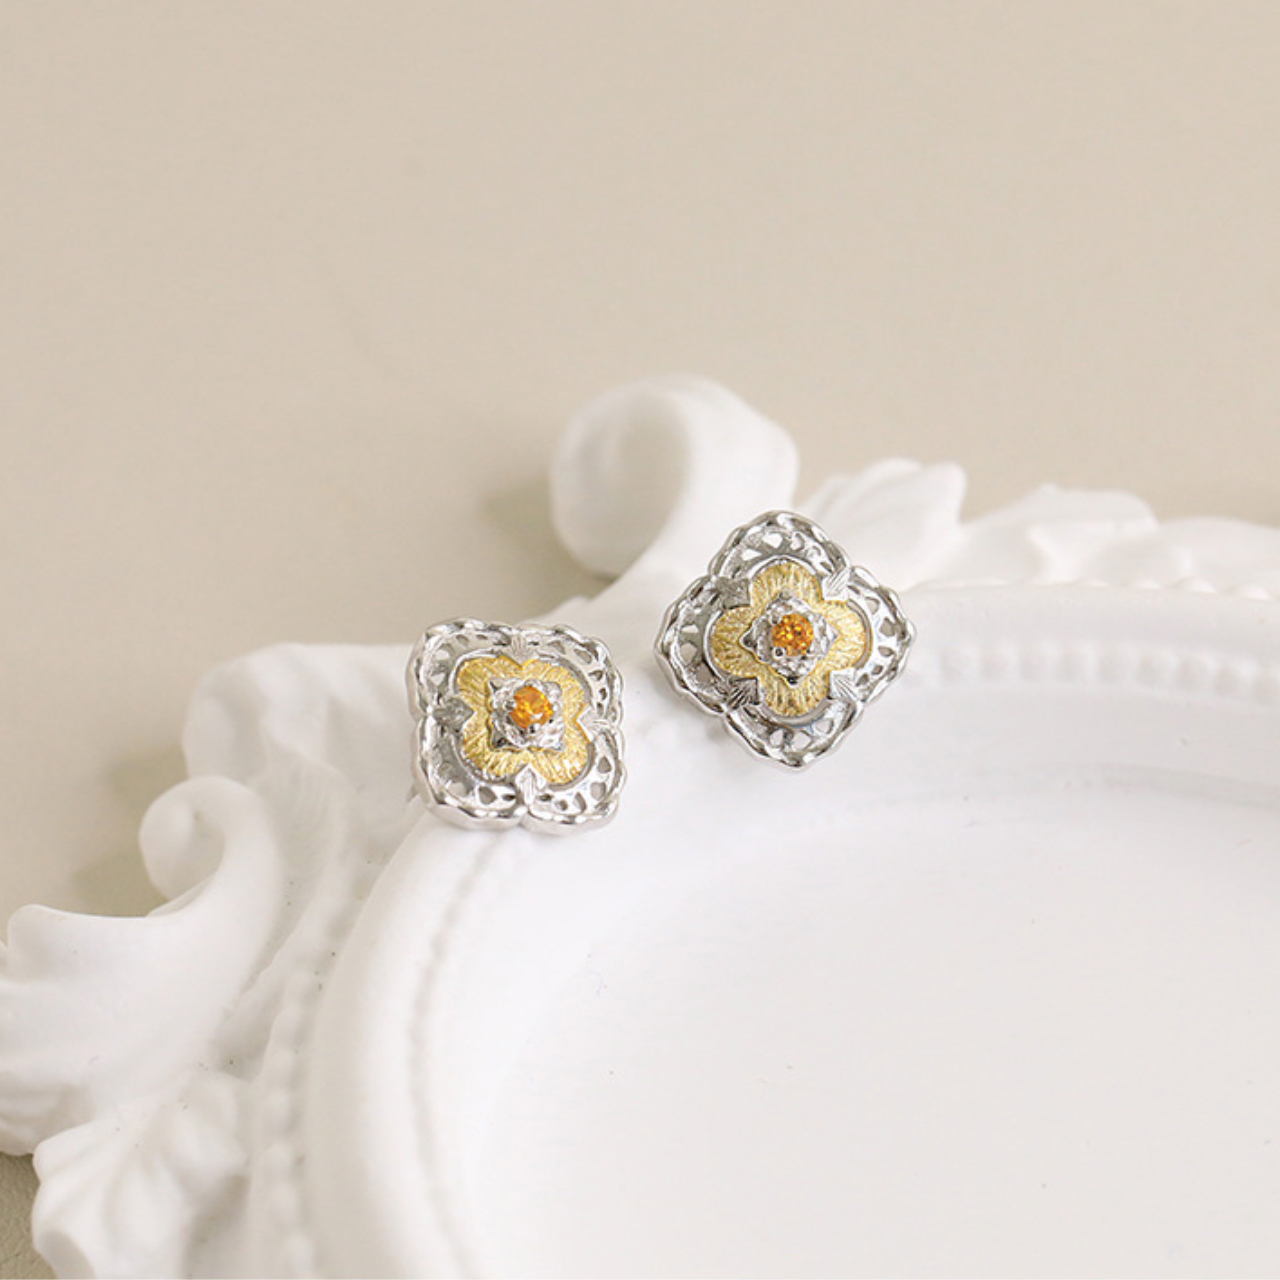 Gold and Silver Clover Earrings